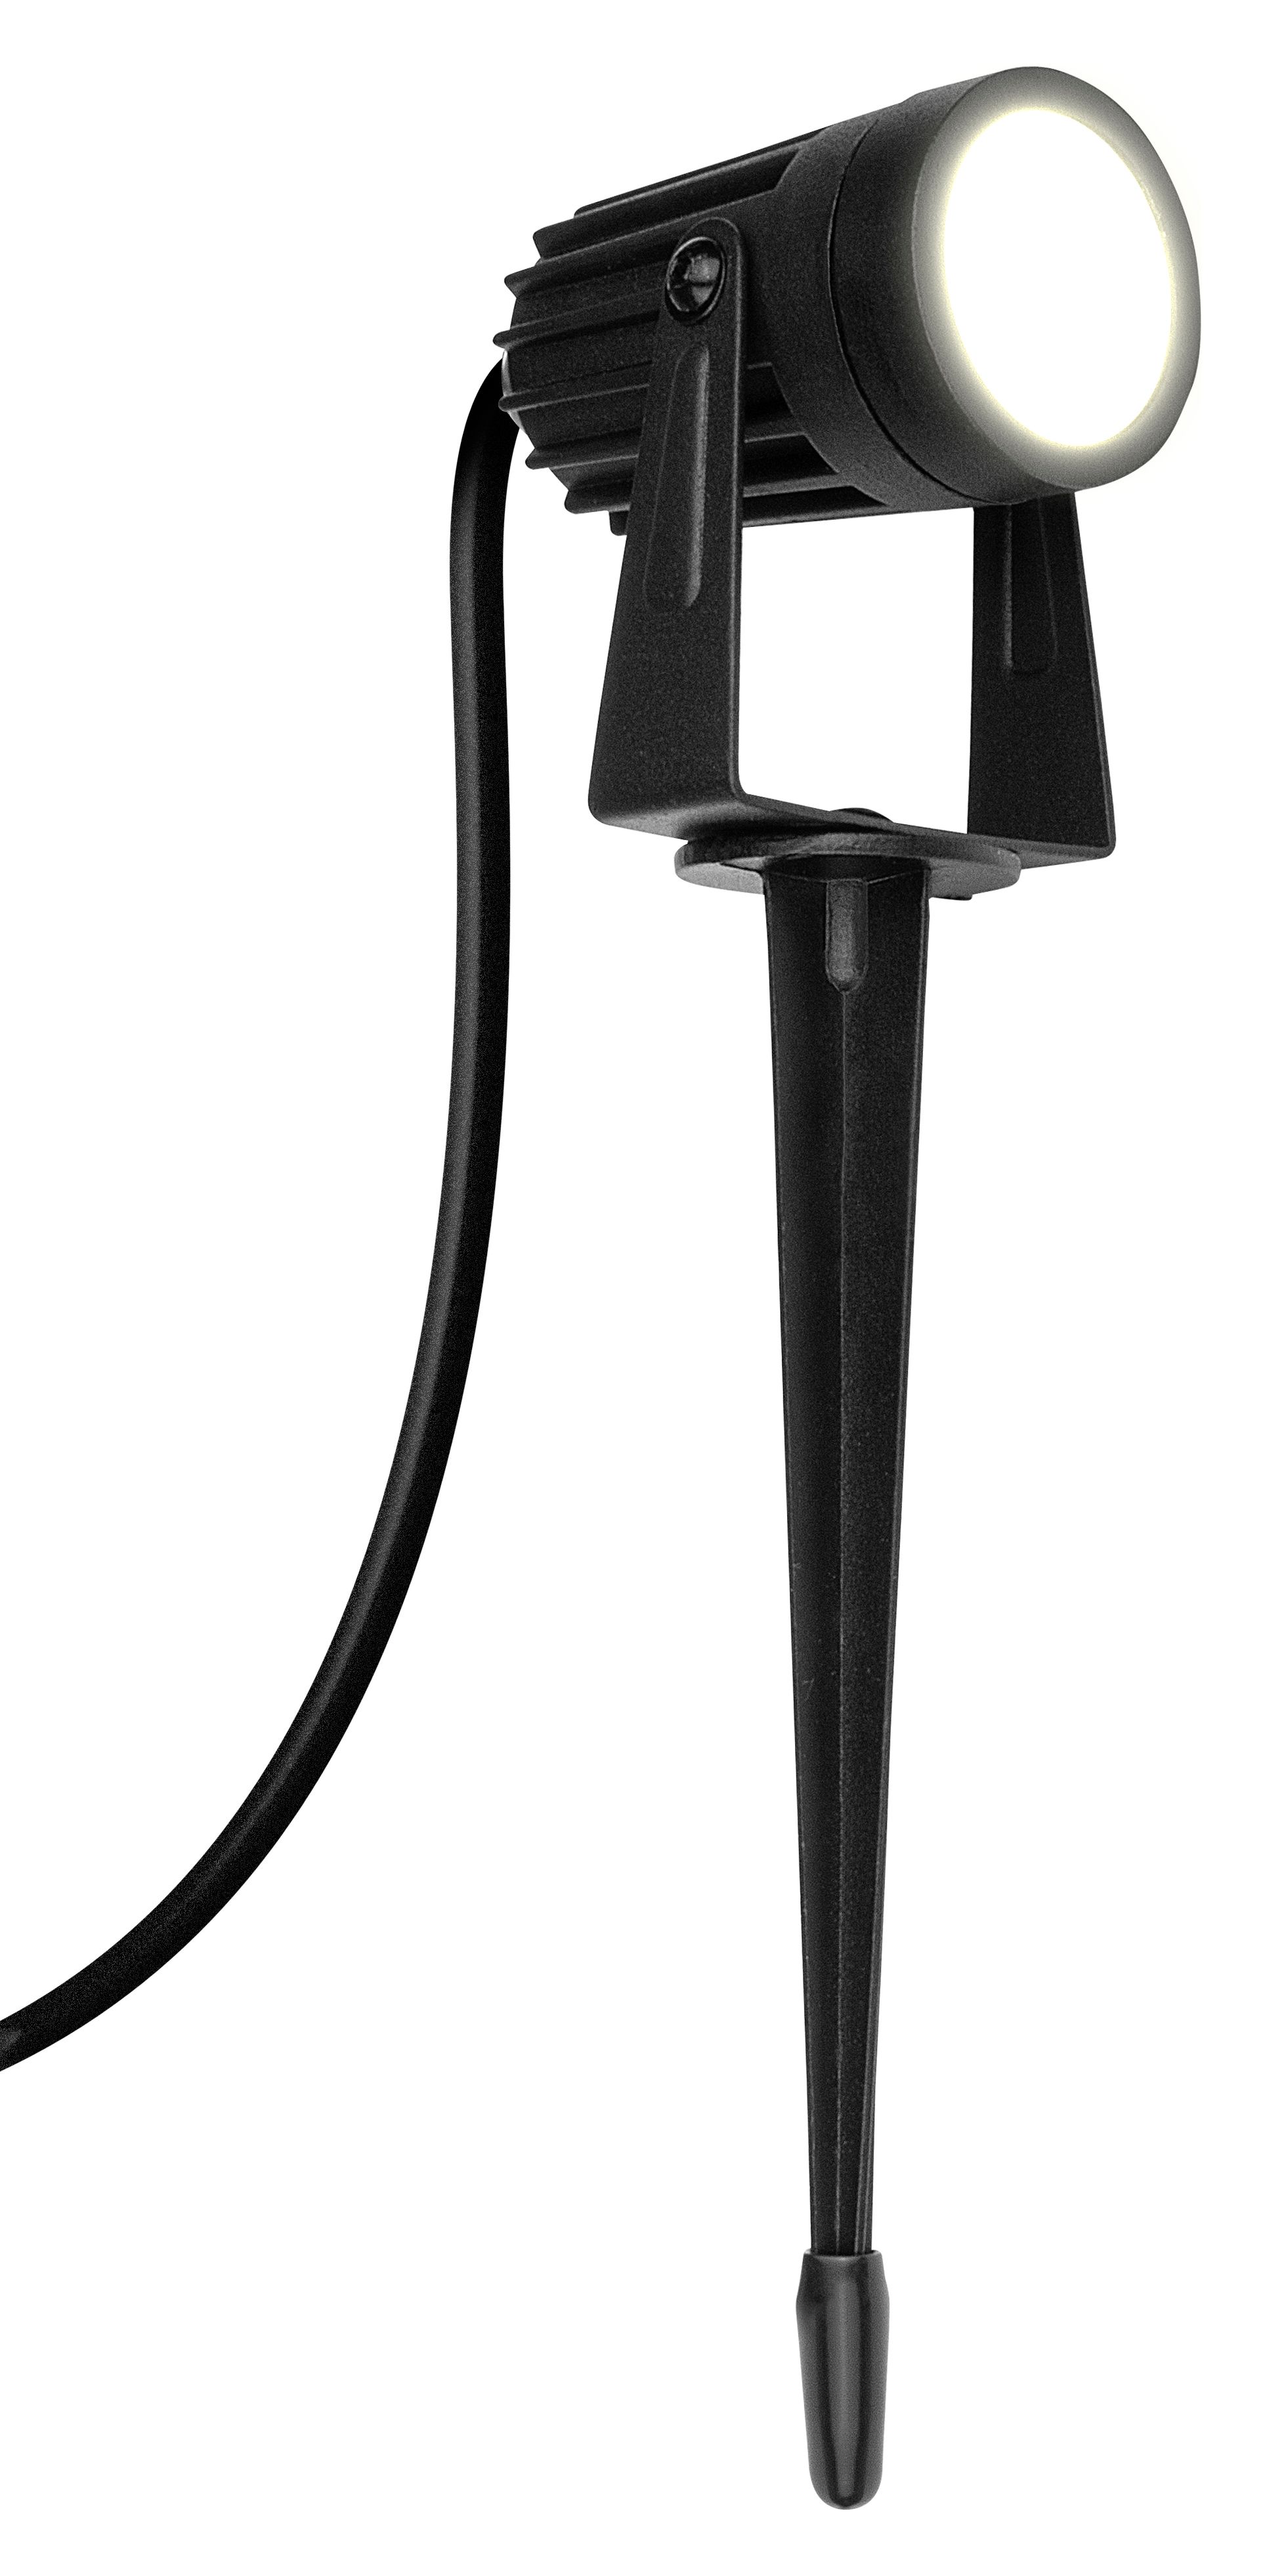 Image of Luceco LED Garden Spike Kit Single Extension Pack